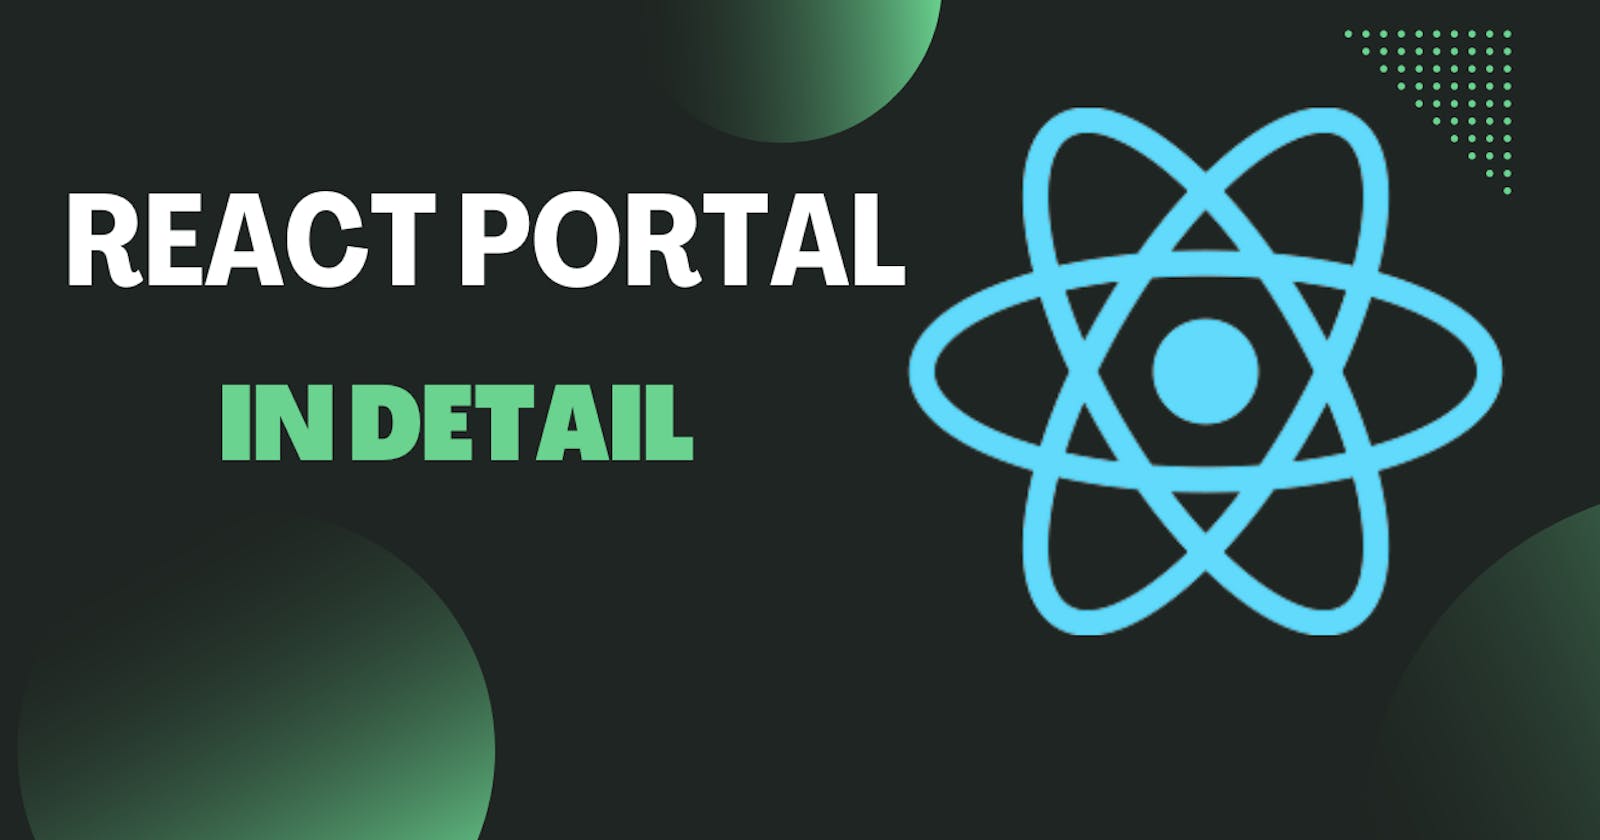 Using React Portals to Render Components Outside the Main DOM Tree